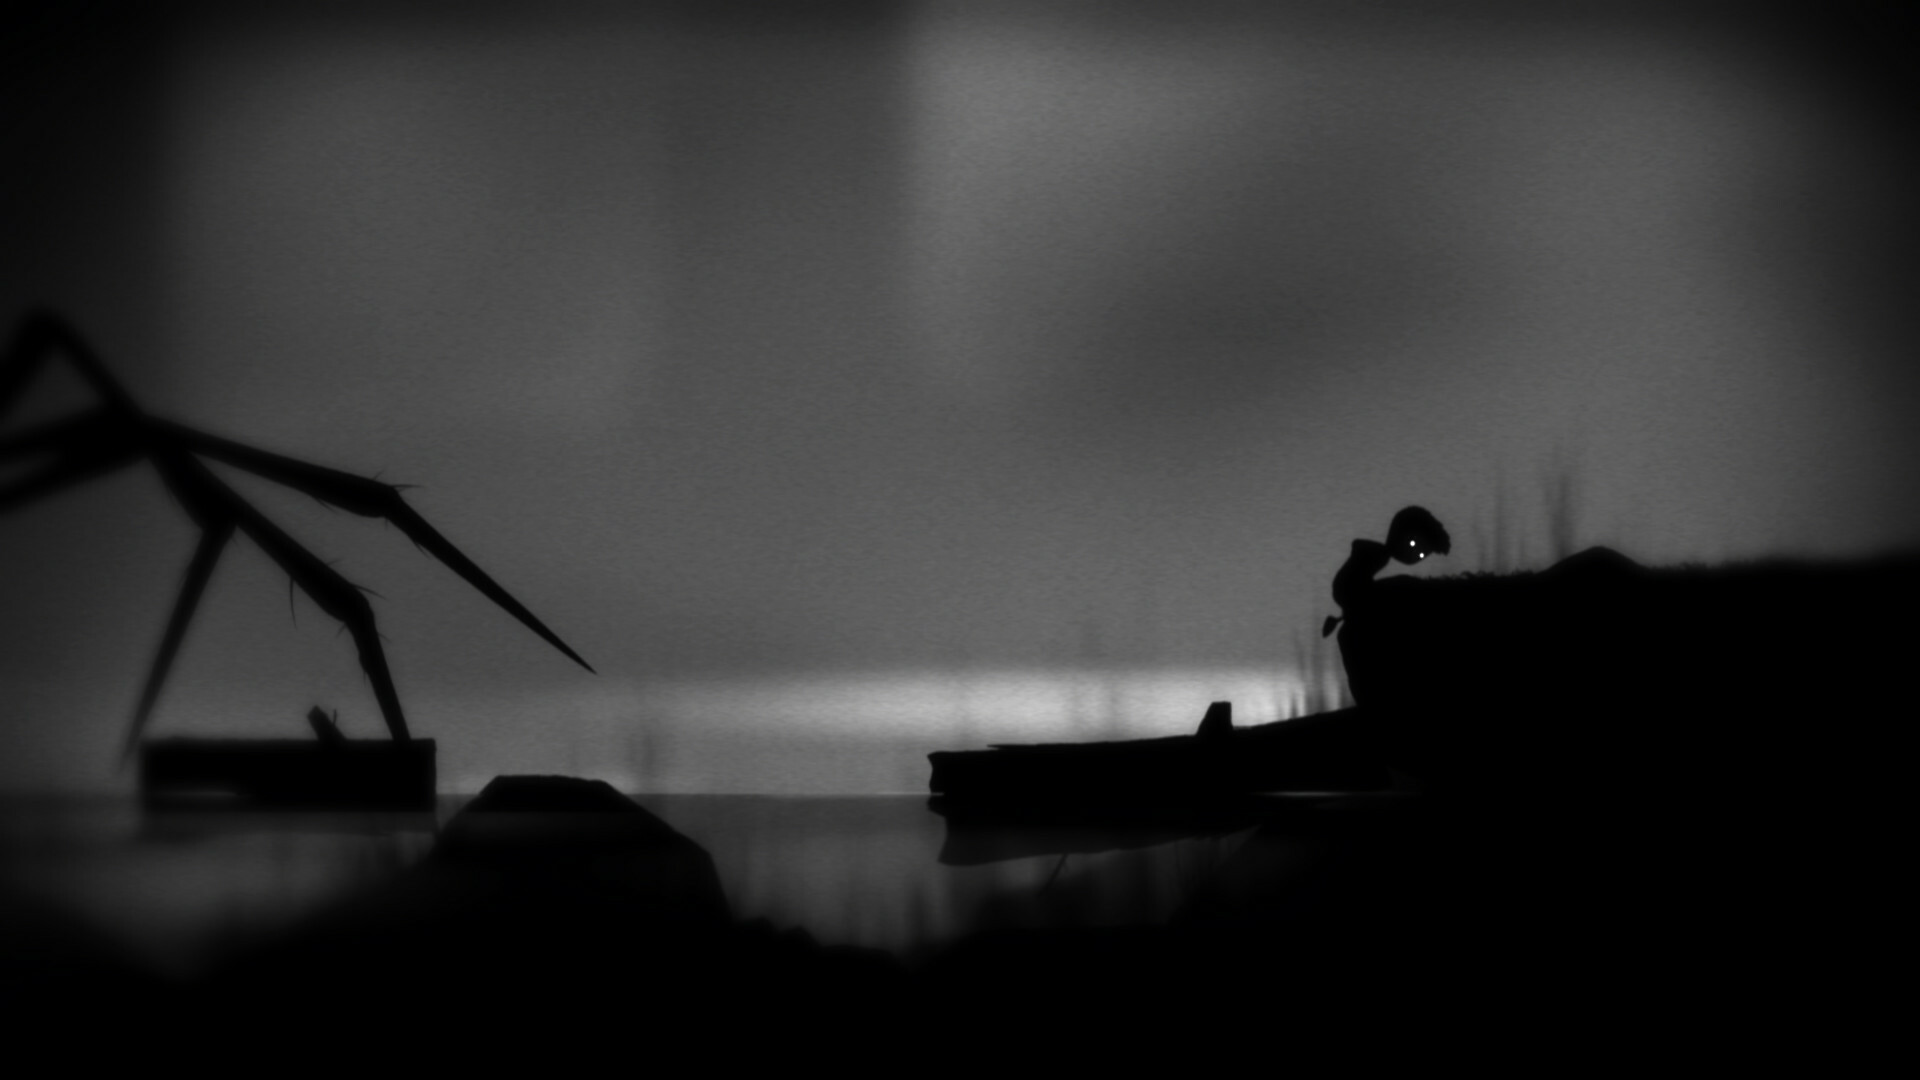 Limbo: The game's story and its ending have been open to much interpretation, The ending was purposely left vague and unanswered by Playdead. 1920x1080 Full HD Wallpaper.